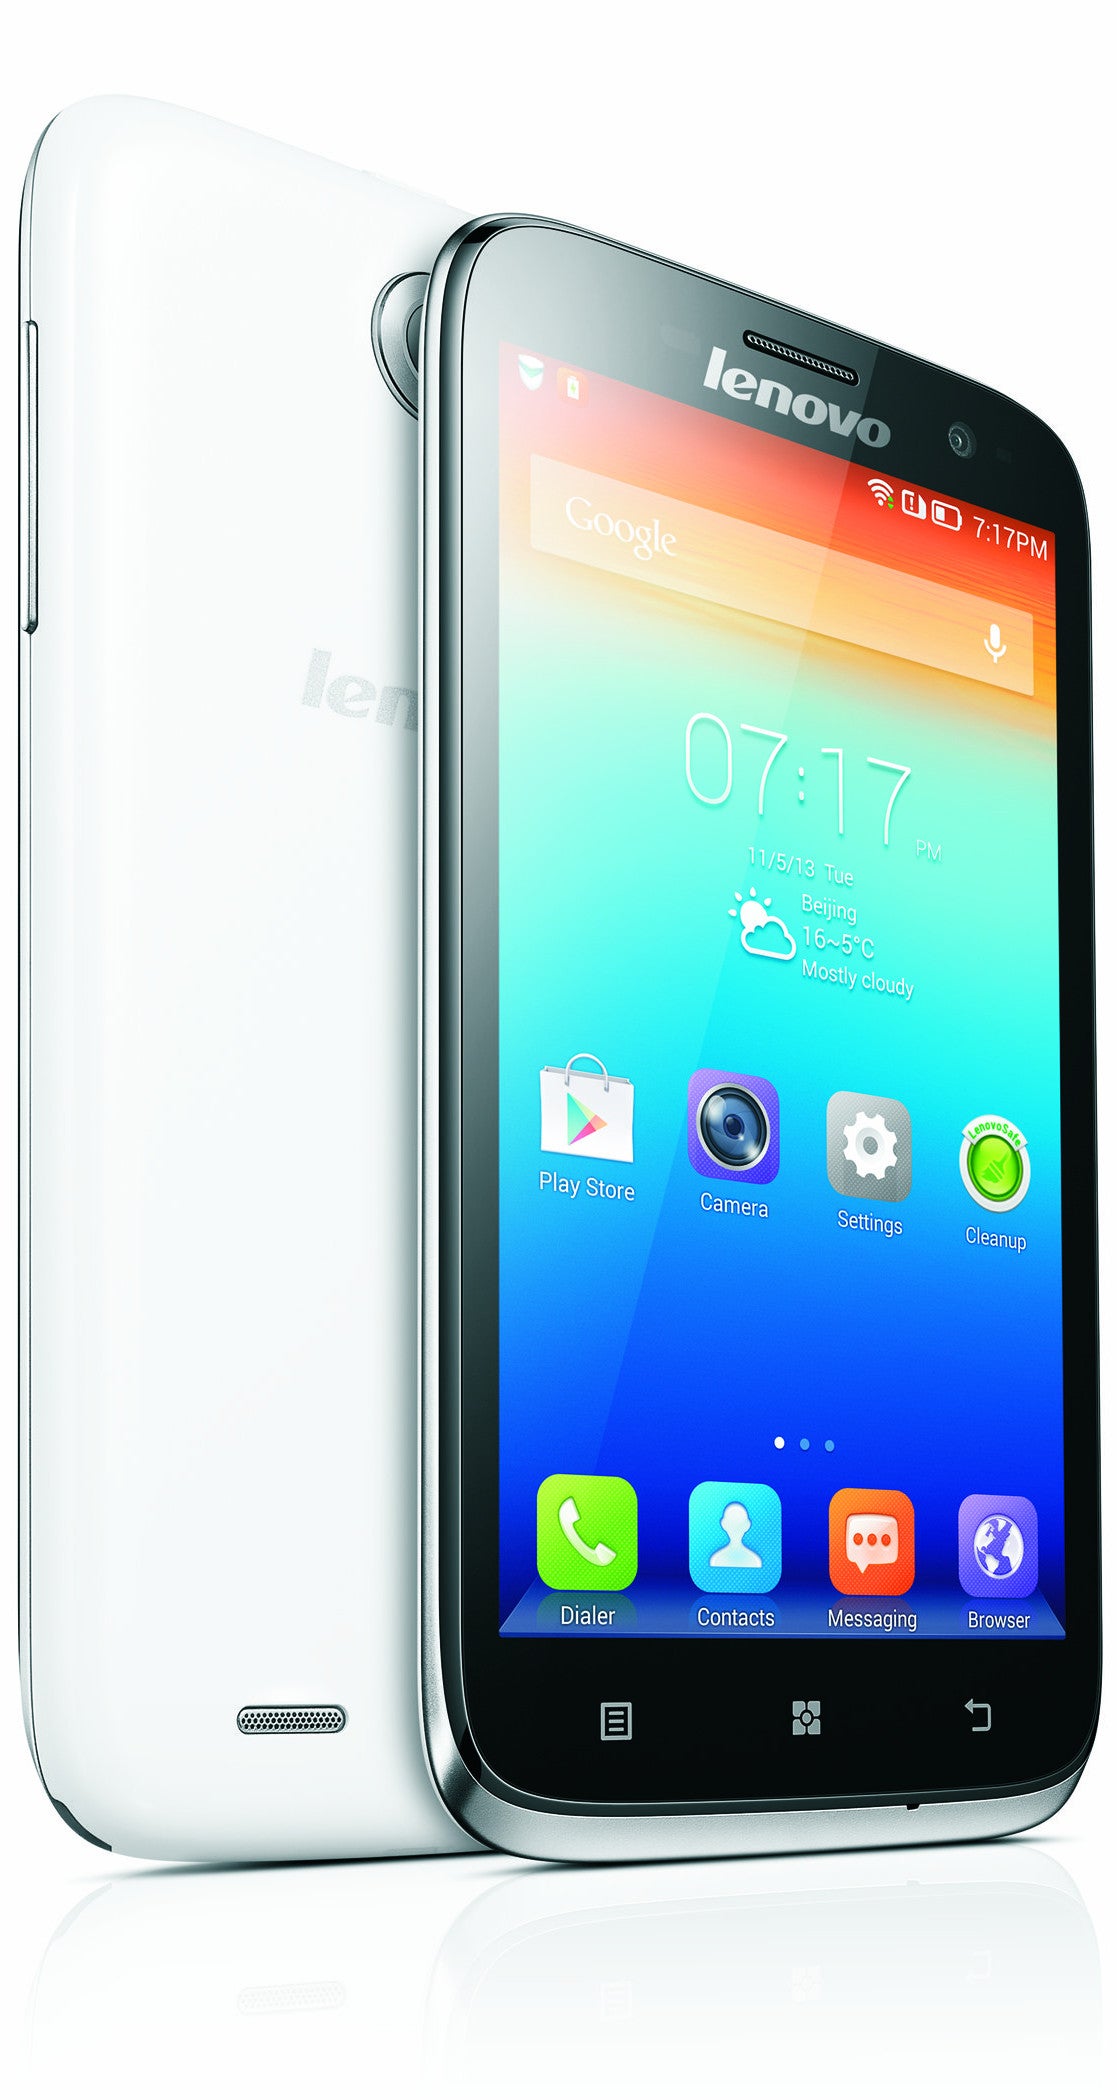 Lenovo A859 - Lenovo introduces the 6-inch S930, the 4.7-inch S650, and a 5-inch A859